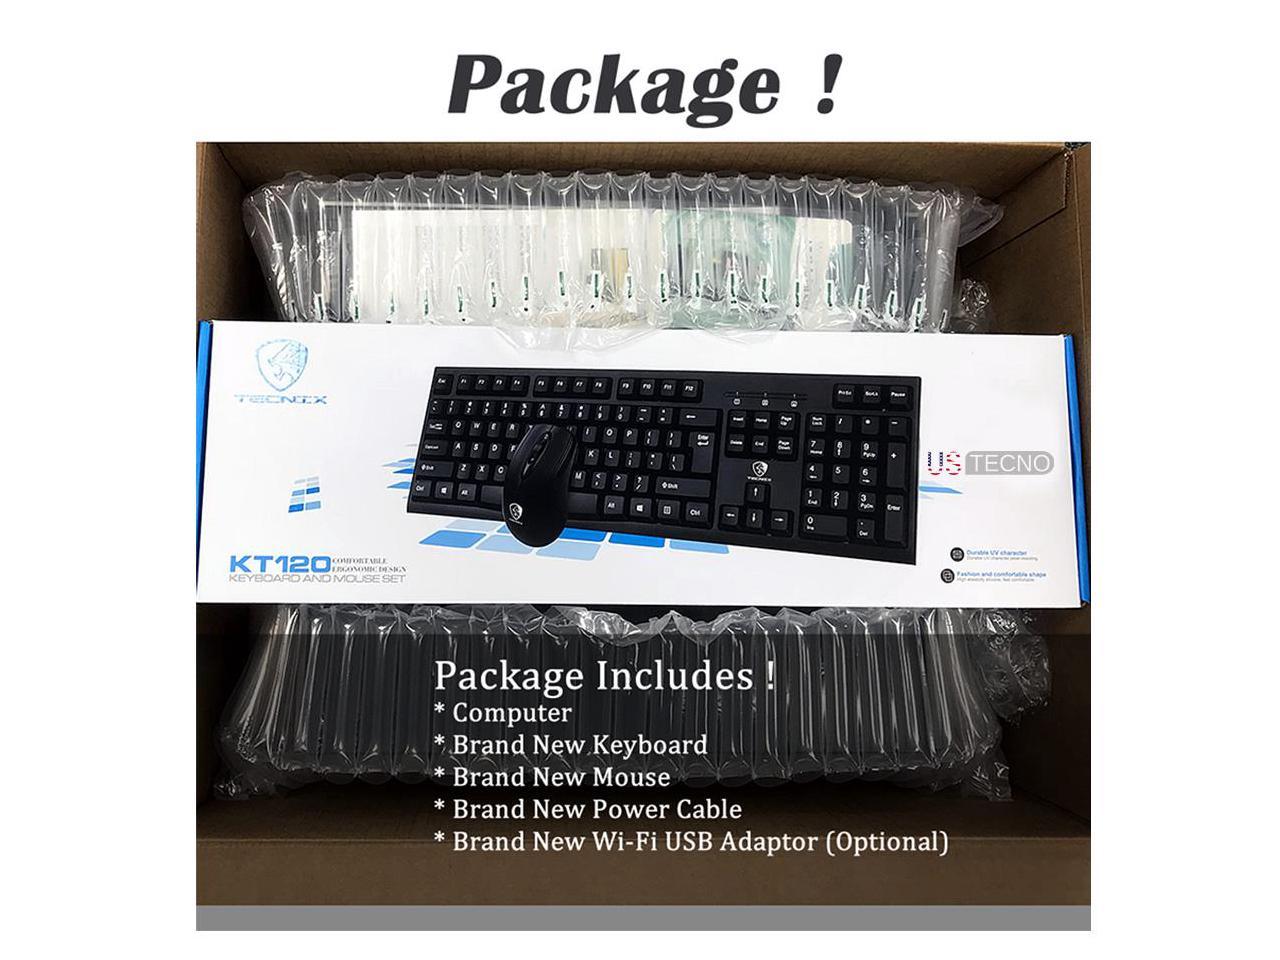 Dell Optiplex 9010 Tower Computer Intel Core i7 3770 16GB 1TB HDD DVD Windows 10 Professional New Free Keyboard, Mouse,Power cord,WiFi Adapter